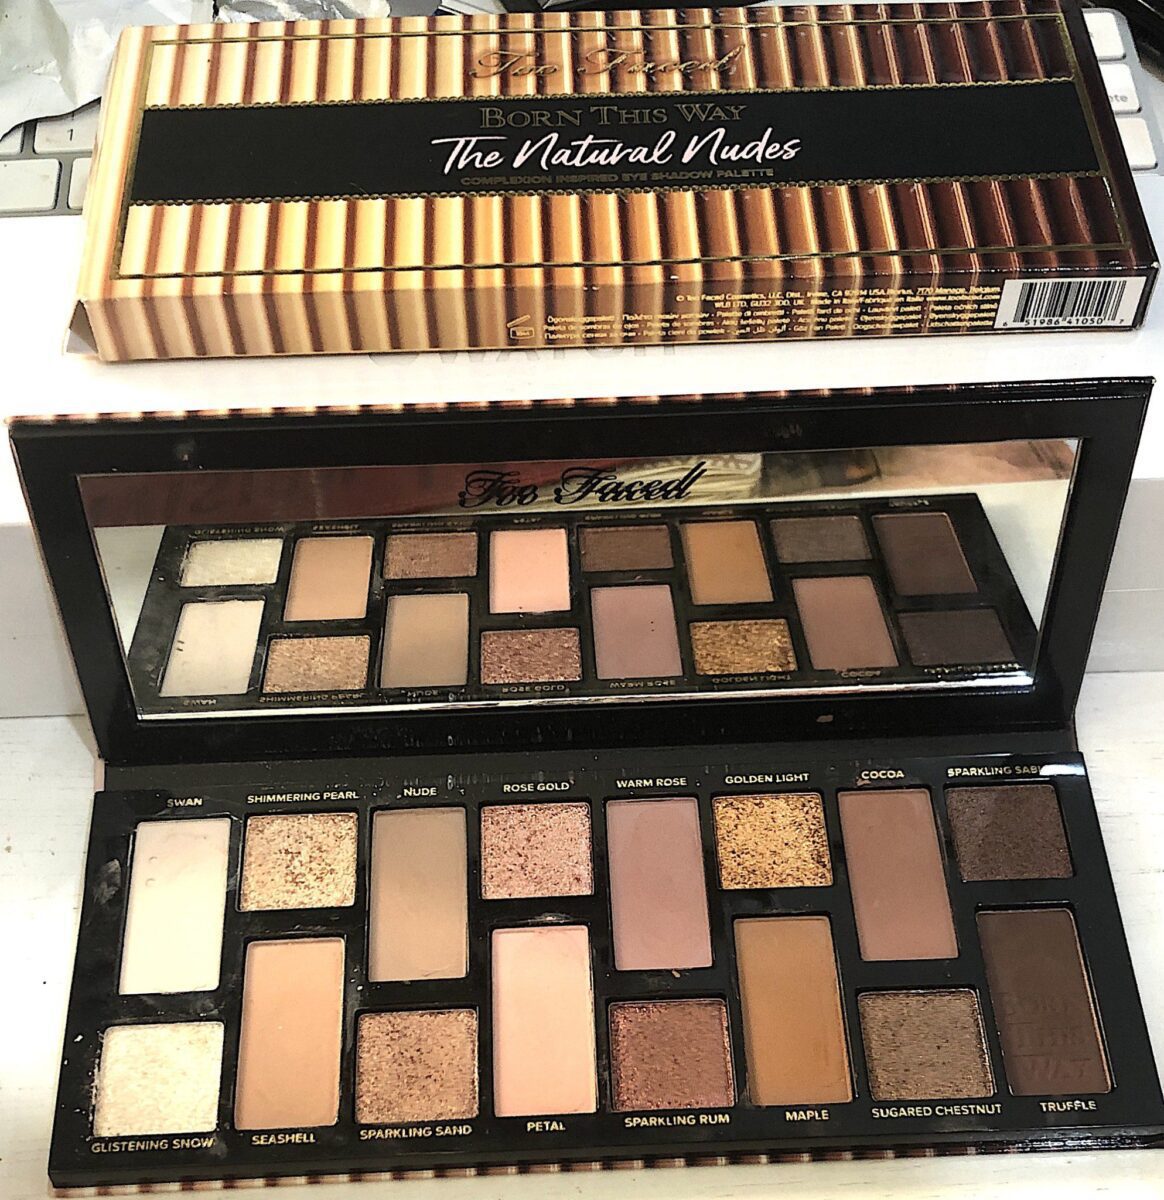 INSIDE THE TOO FACED THE NATURAL NUDES EYESHADOW PALETTE